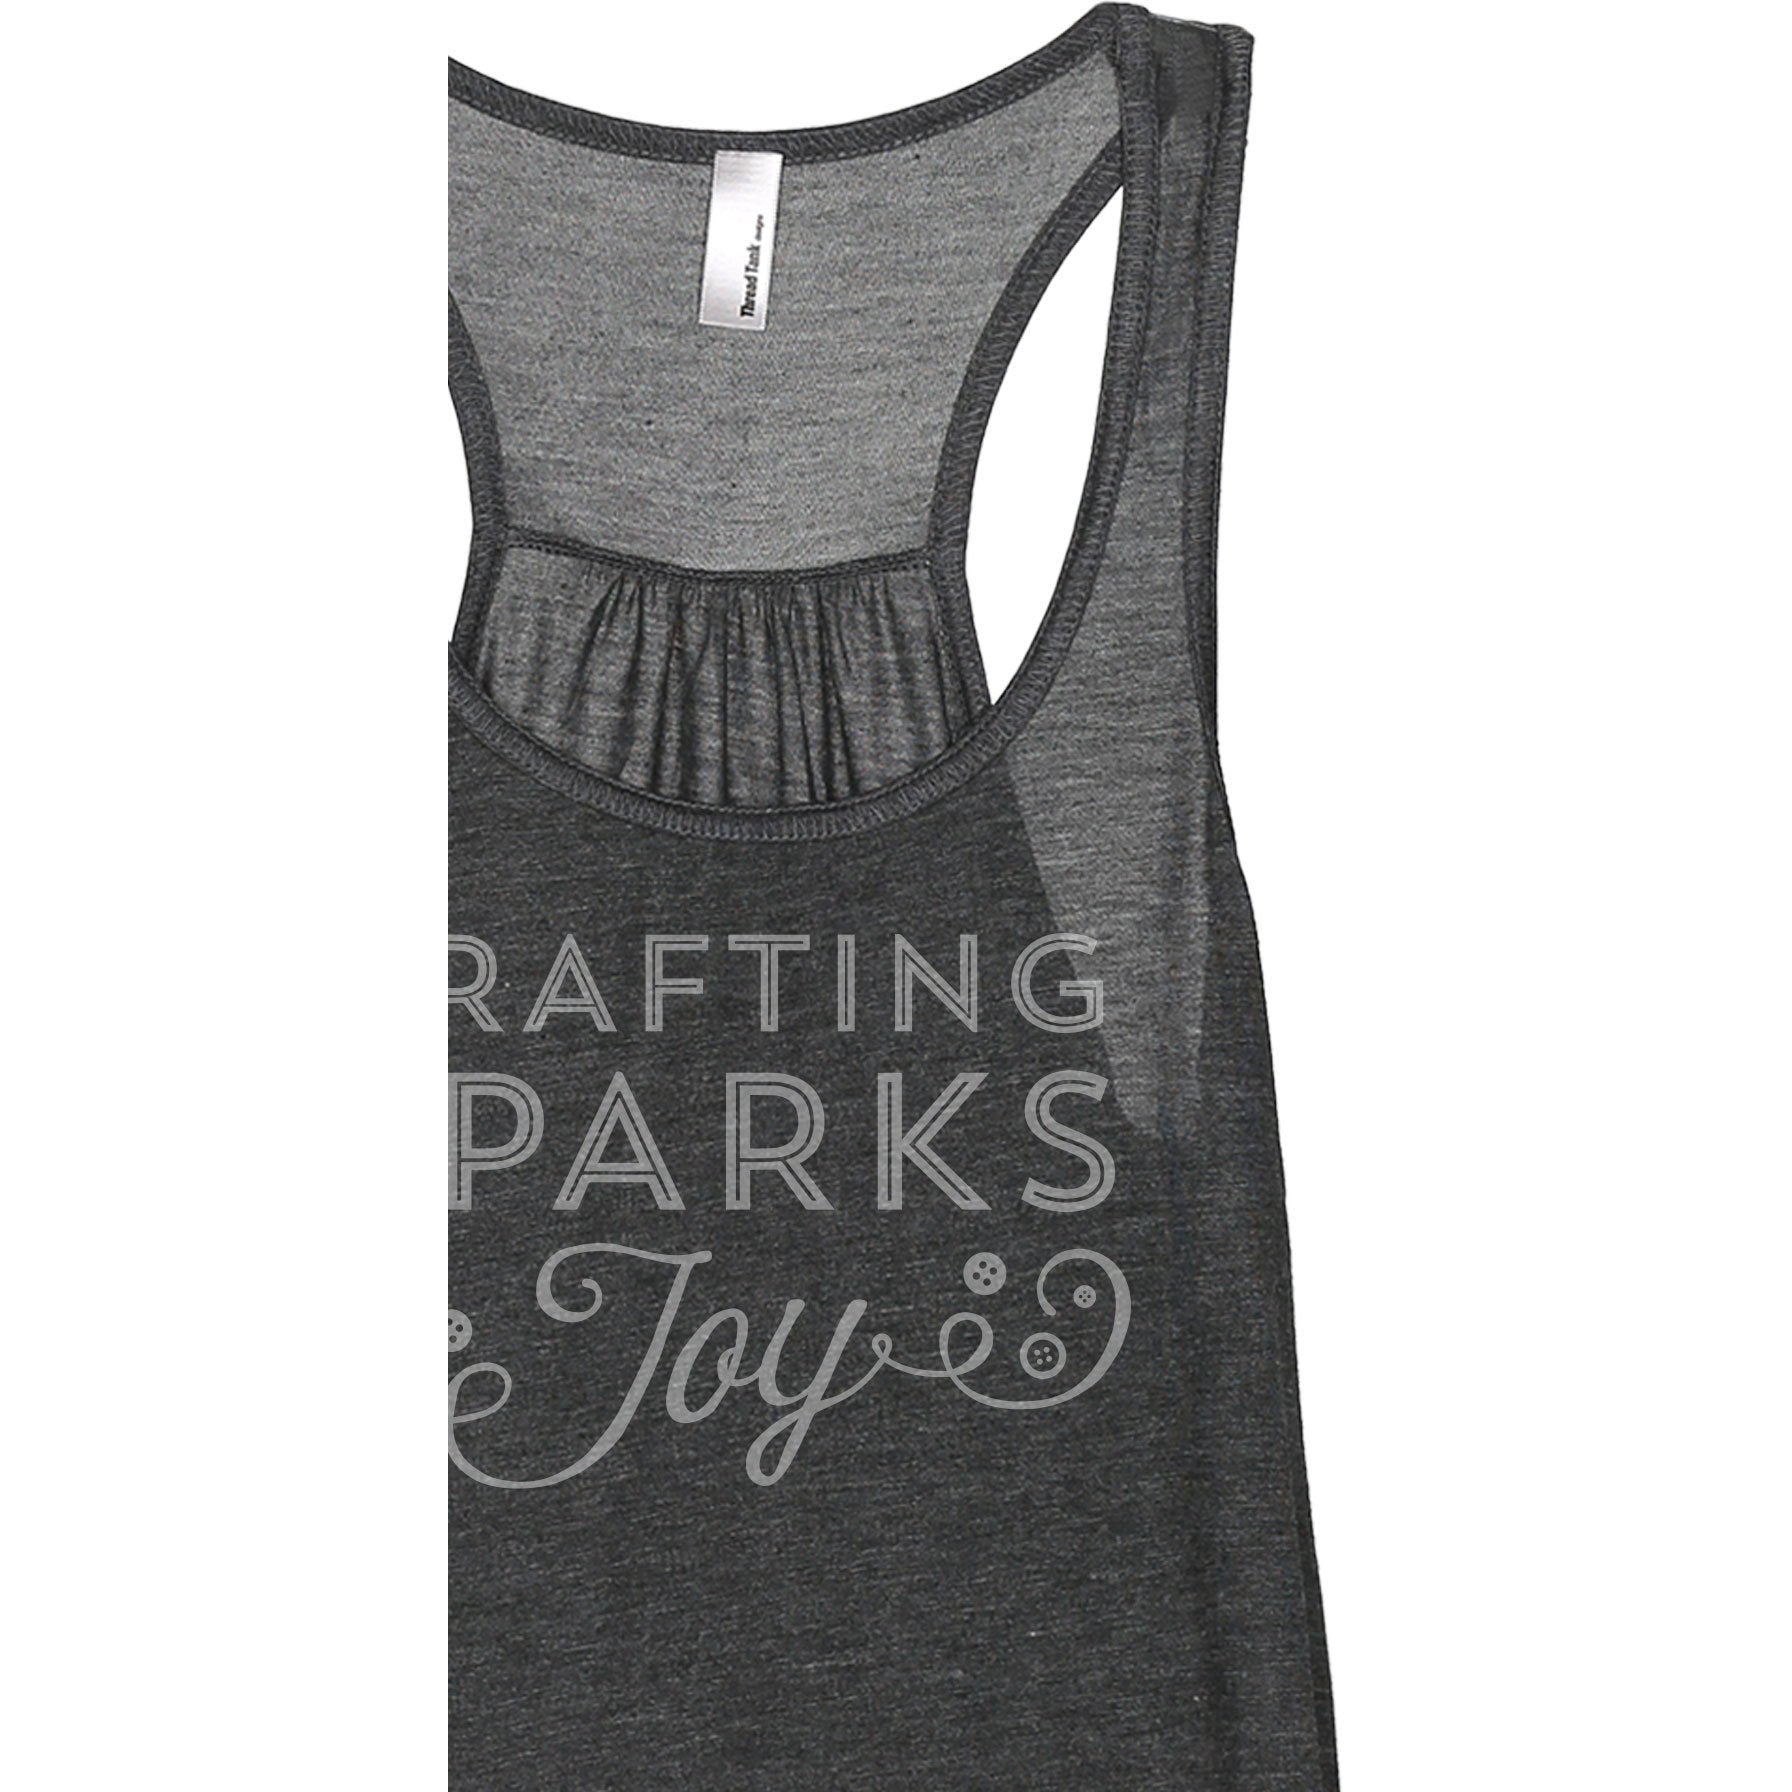 Crafting Sparks Joy Women's Relaxed Flowy Racerback Tank Tee Charcoal